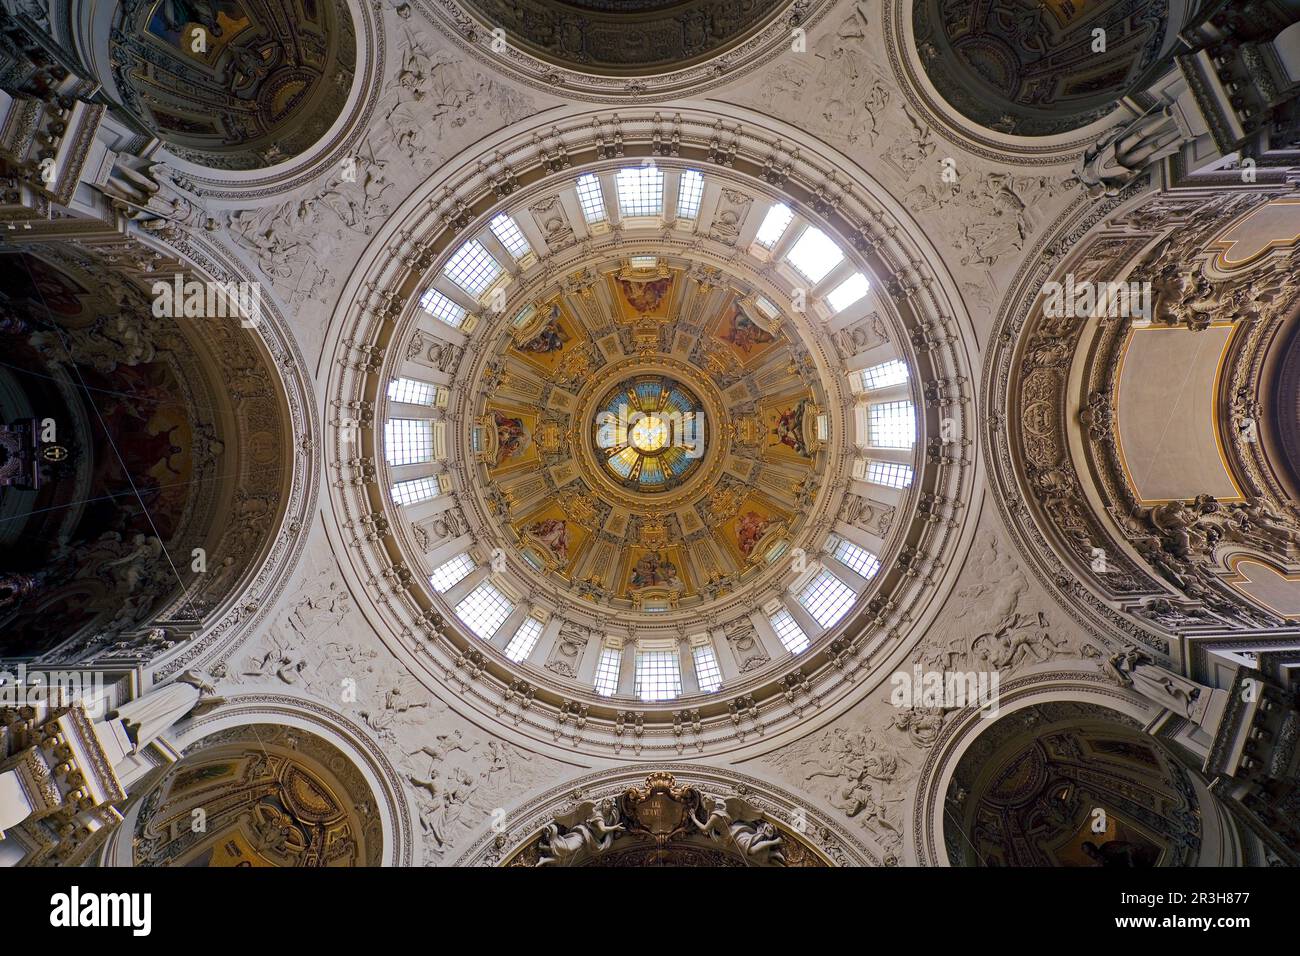 Looking up into the dome with central Holy Spirit window with dome windows, Berlin Cathedral Germany Stock Photo